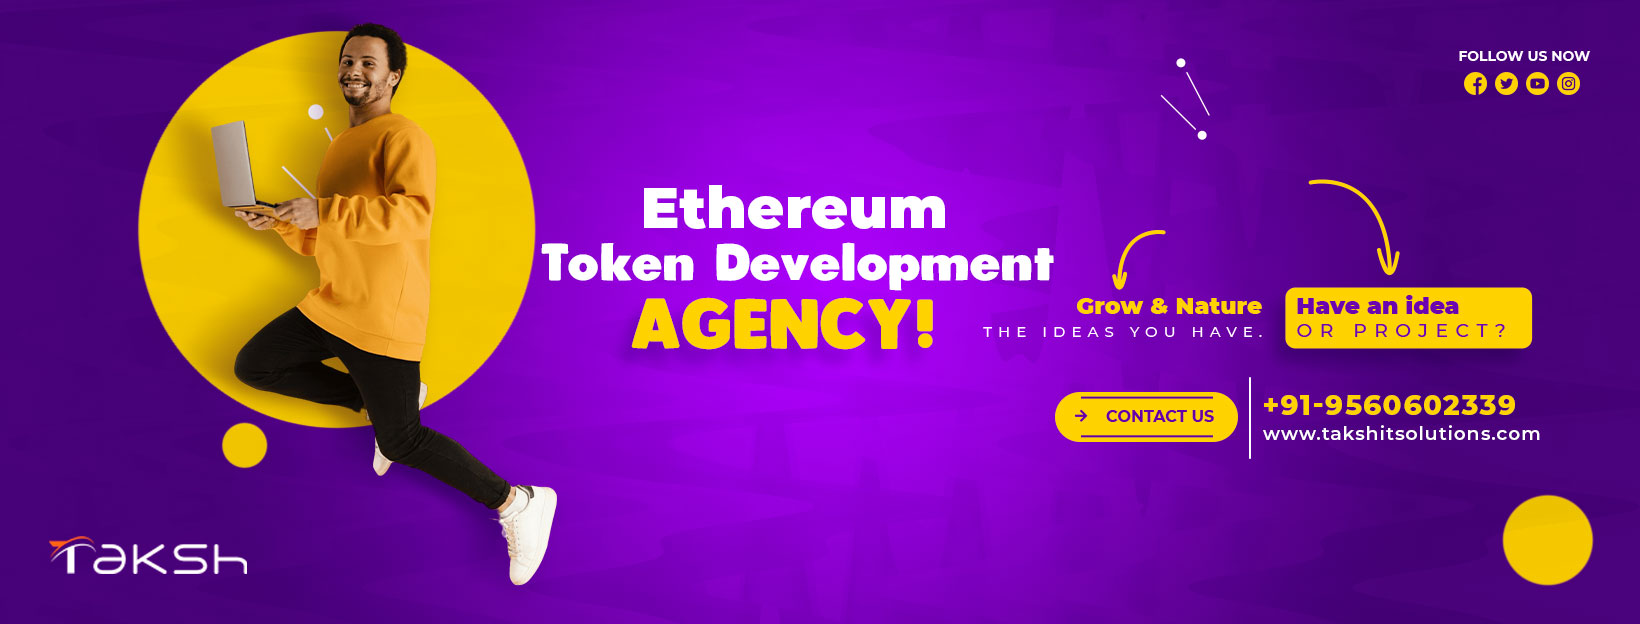 Ethereum Token Development Company: Taksh IT Solutions Private Limited